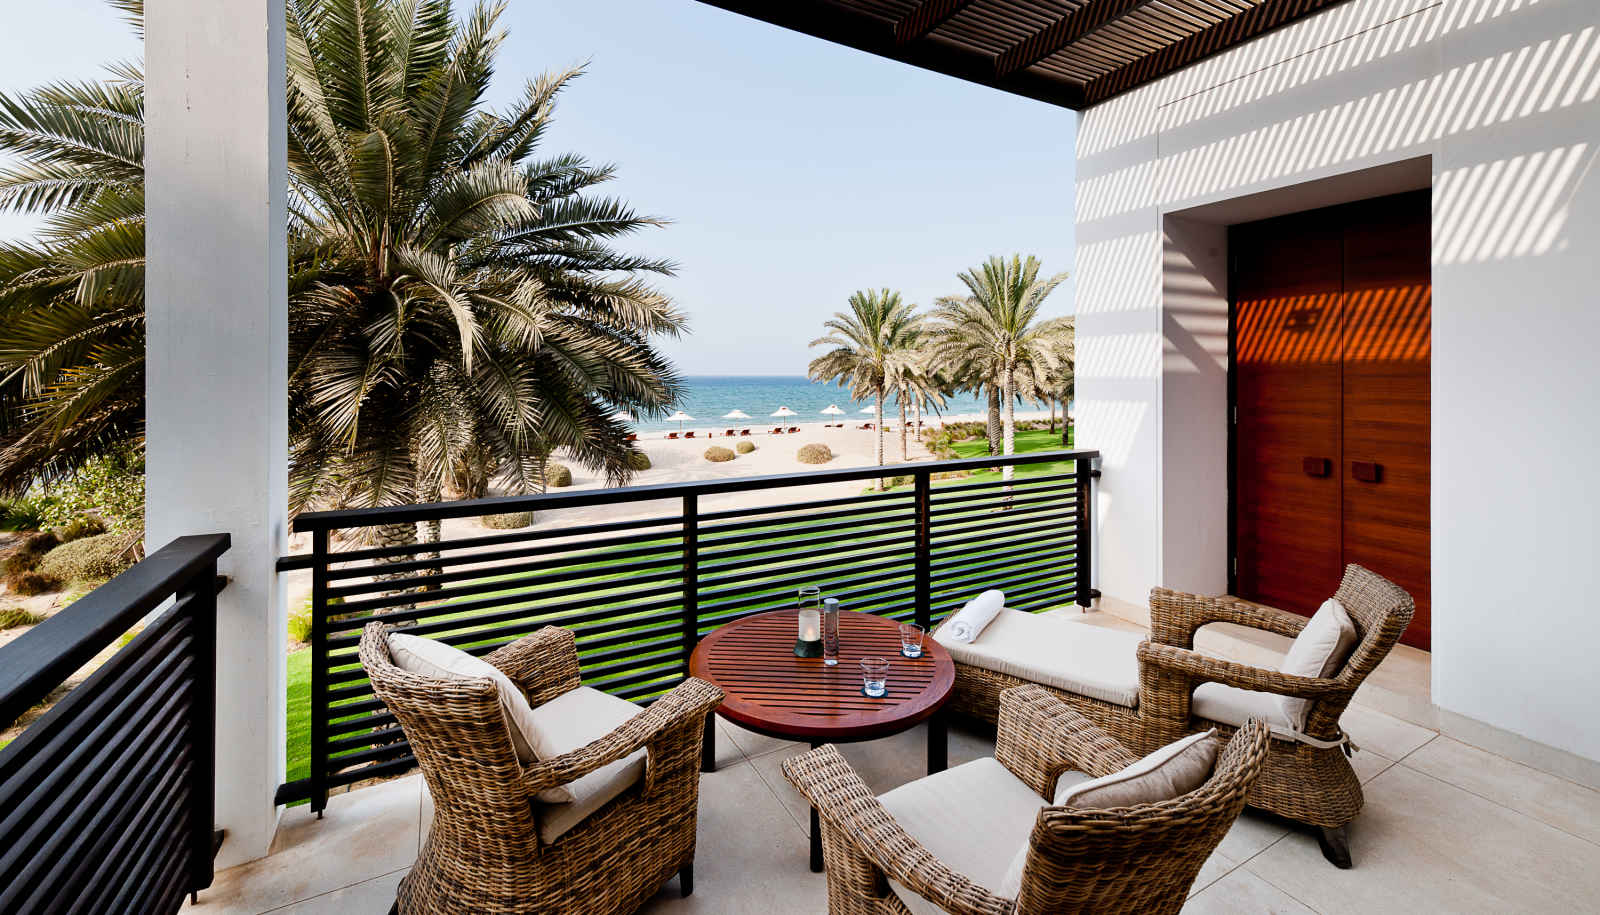 Suite Terrace Ocean View, The Chedi Muscat, Mascate, Oman